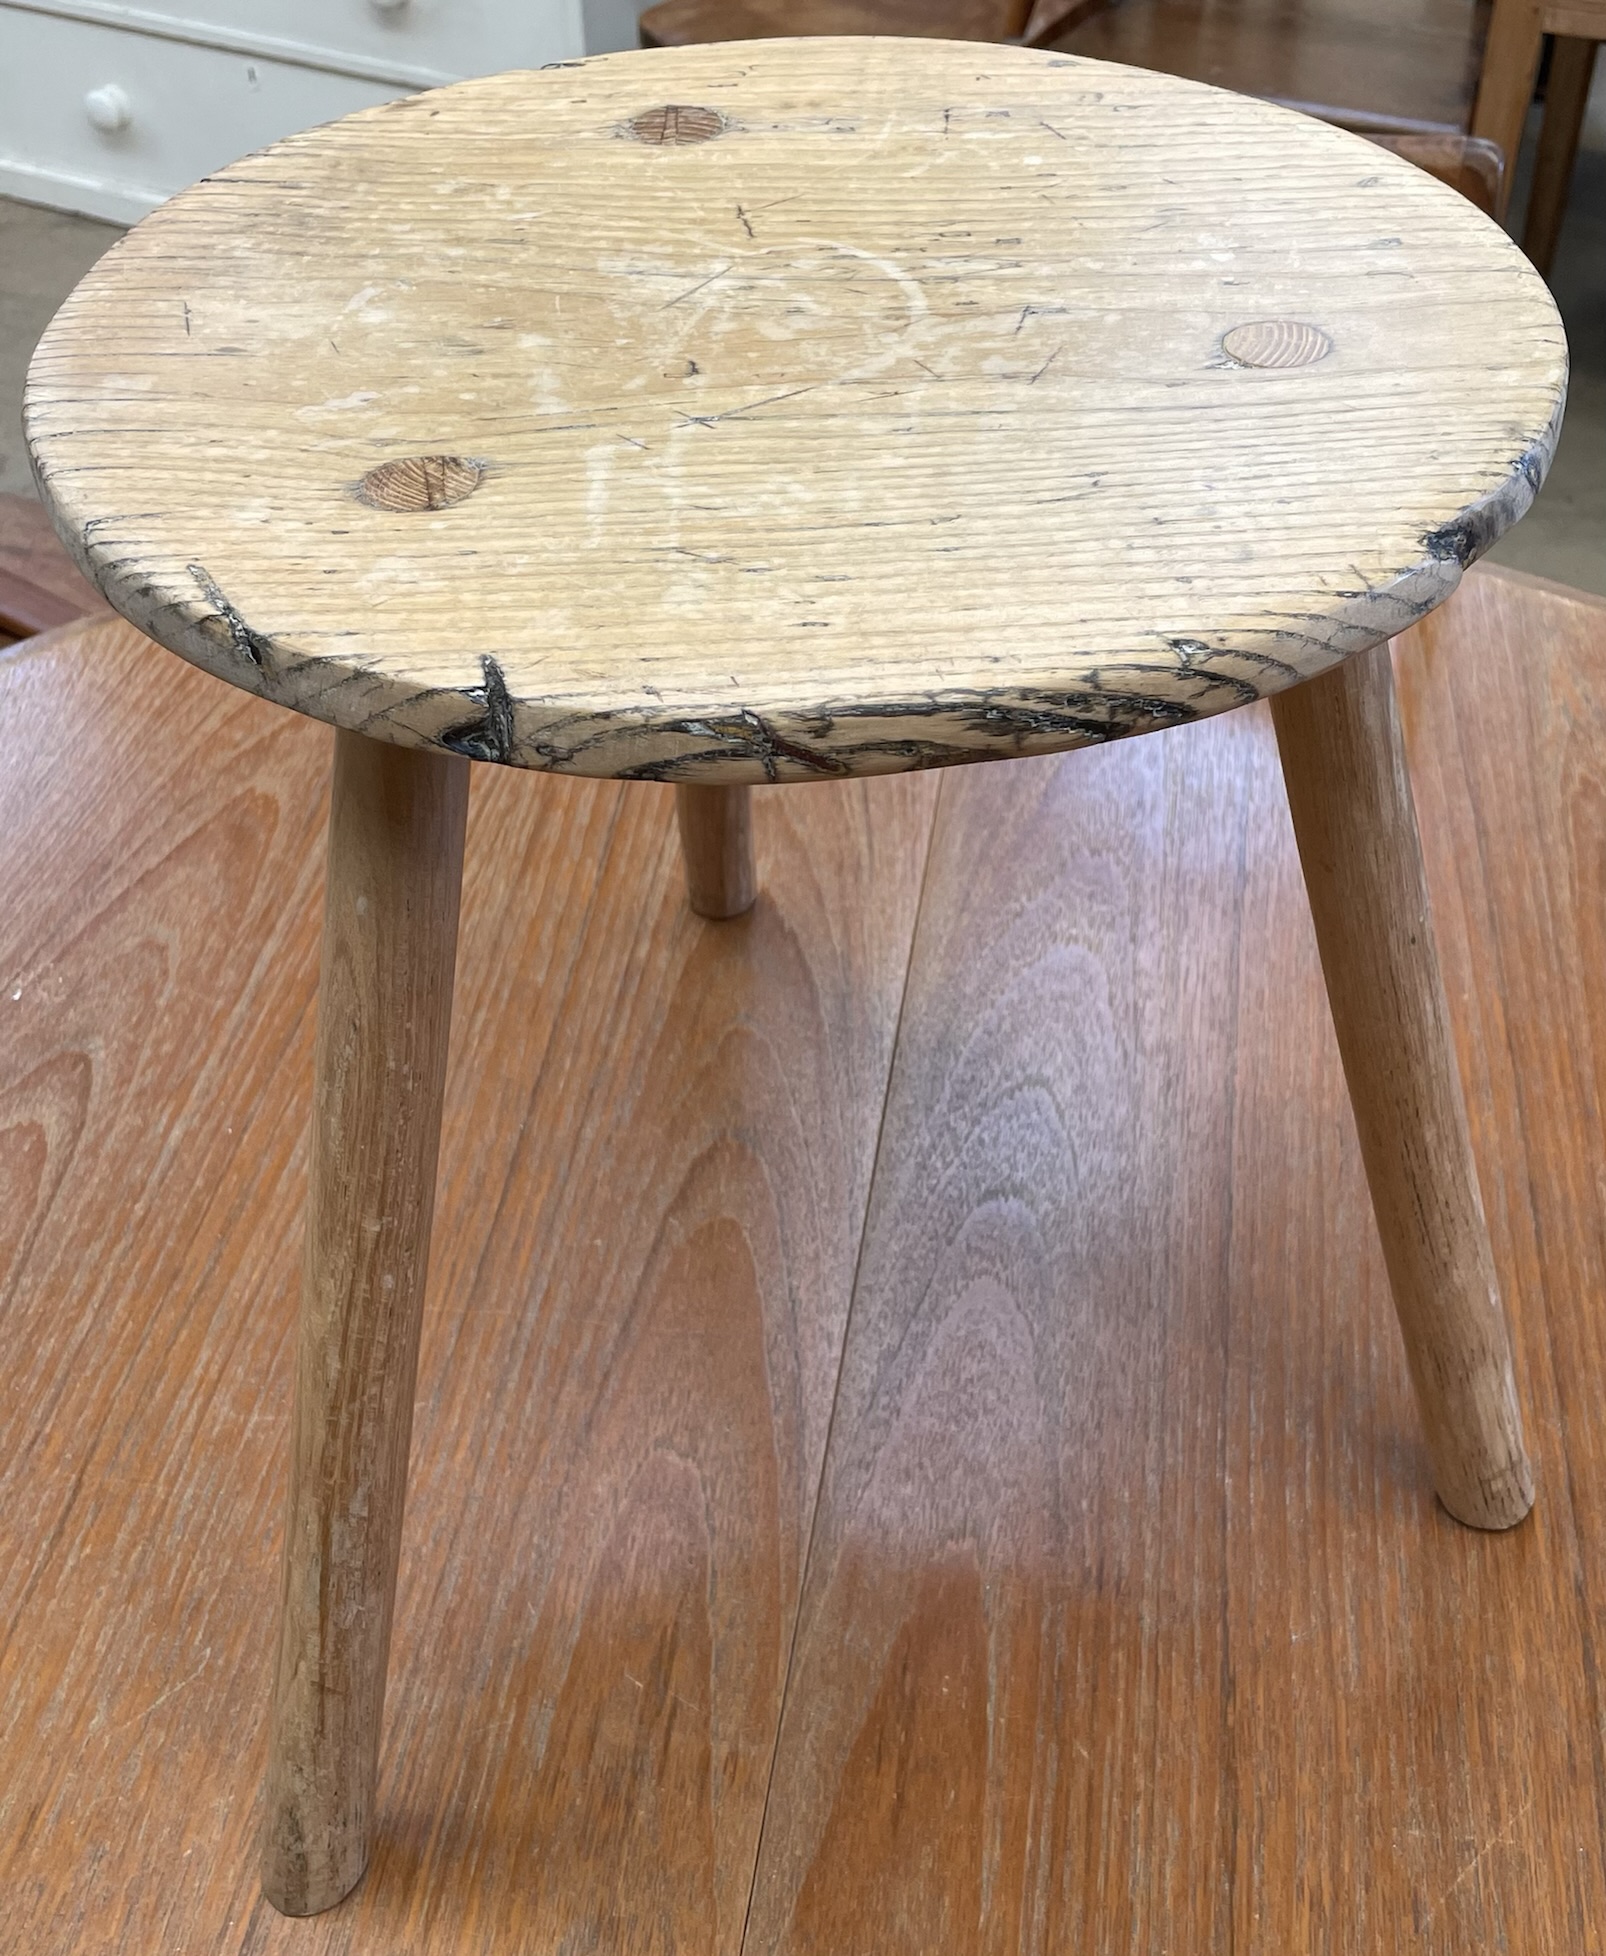 A pine milking stool with a circular top and three legs